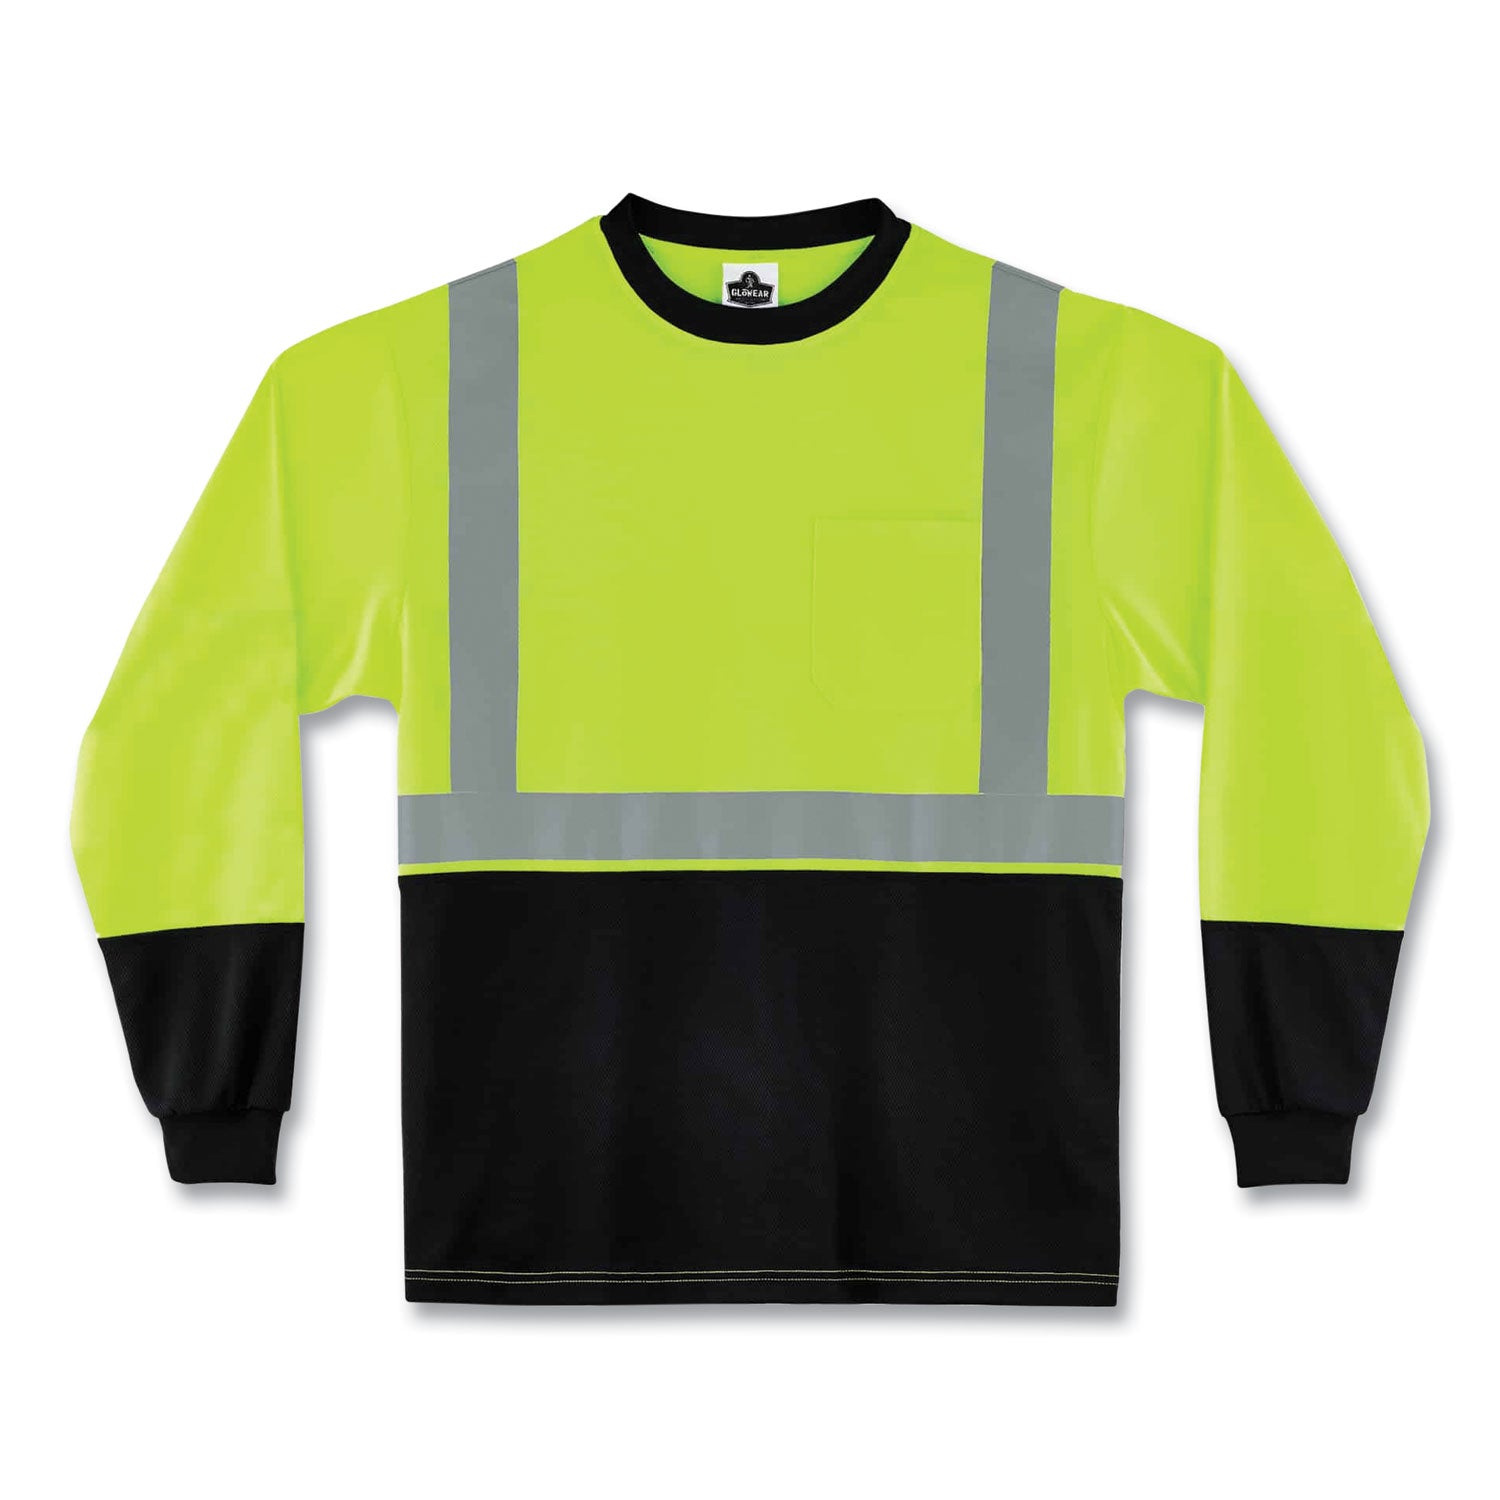 glowear-8291bk-type-r-class-2-black-front-long-sleeve-t-shirt-polyester-5x-large-lime-ships-in-1-3-business-days_ego22709 - 1